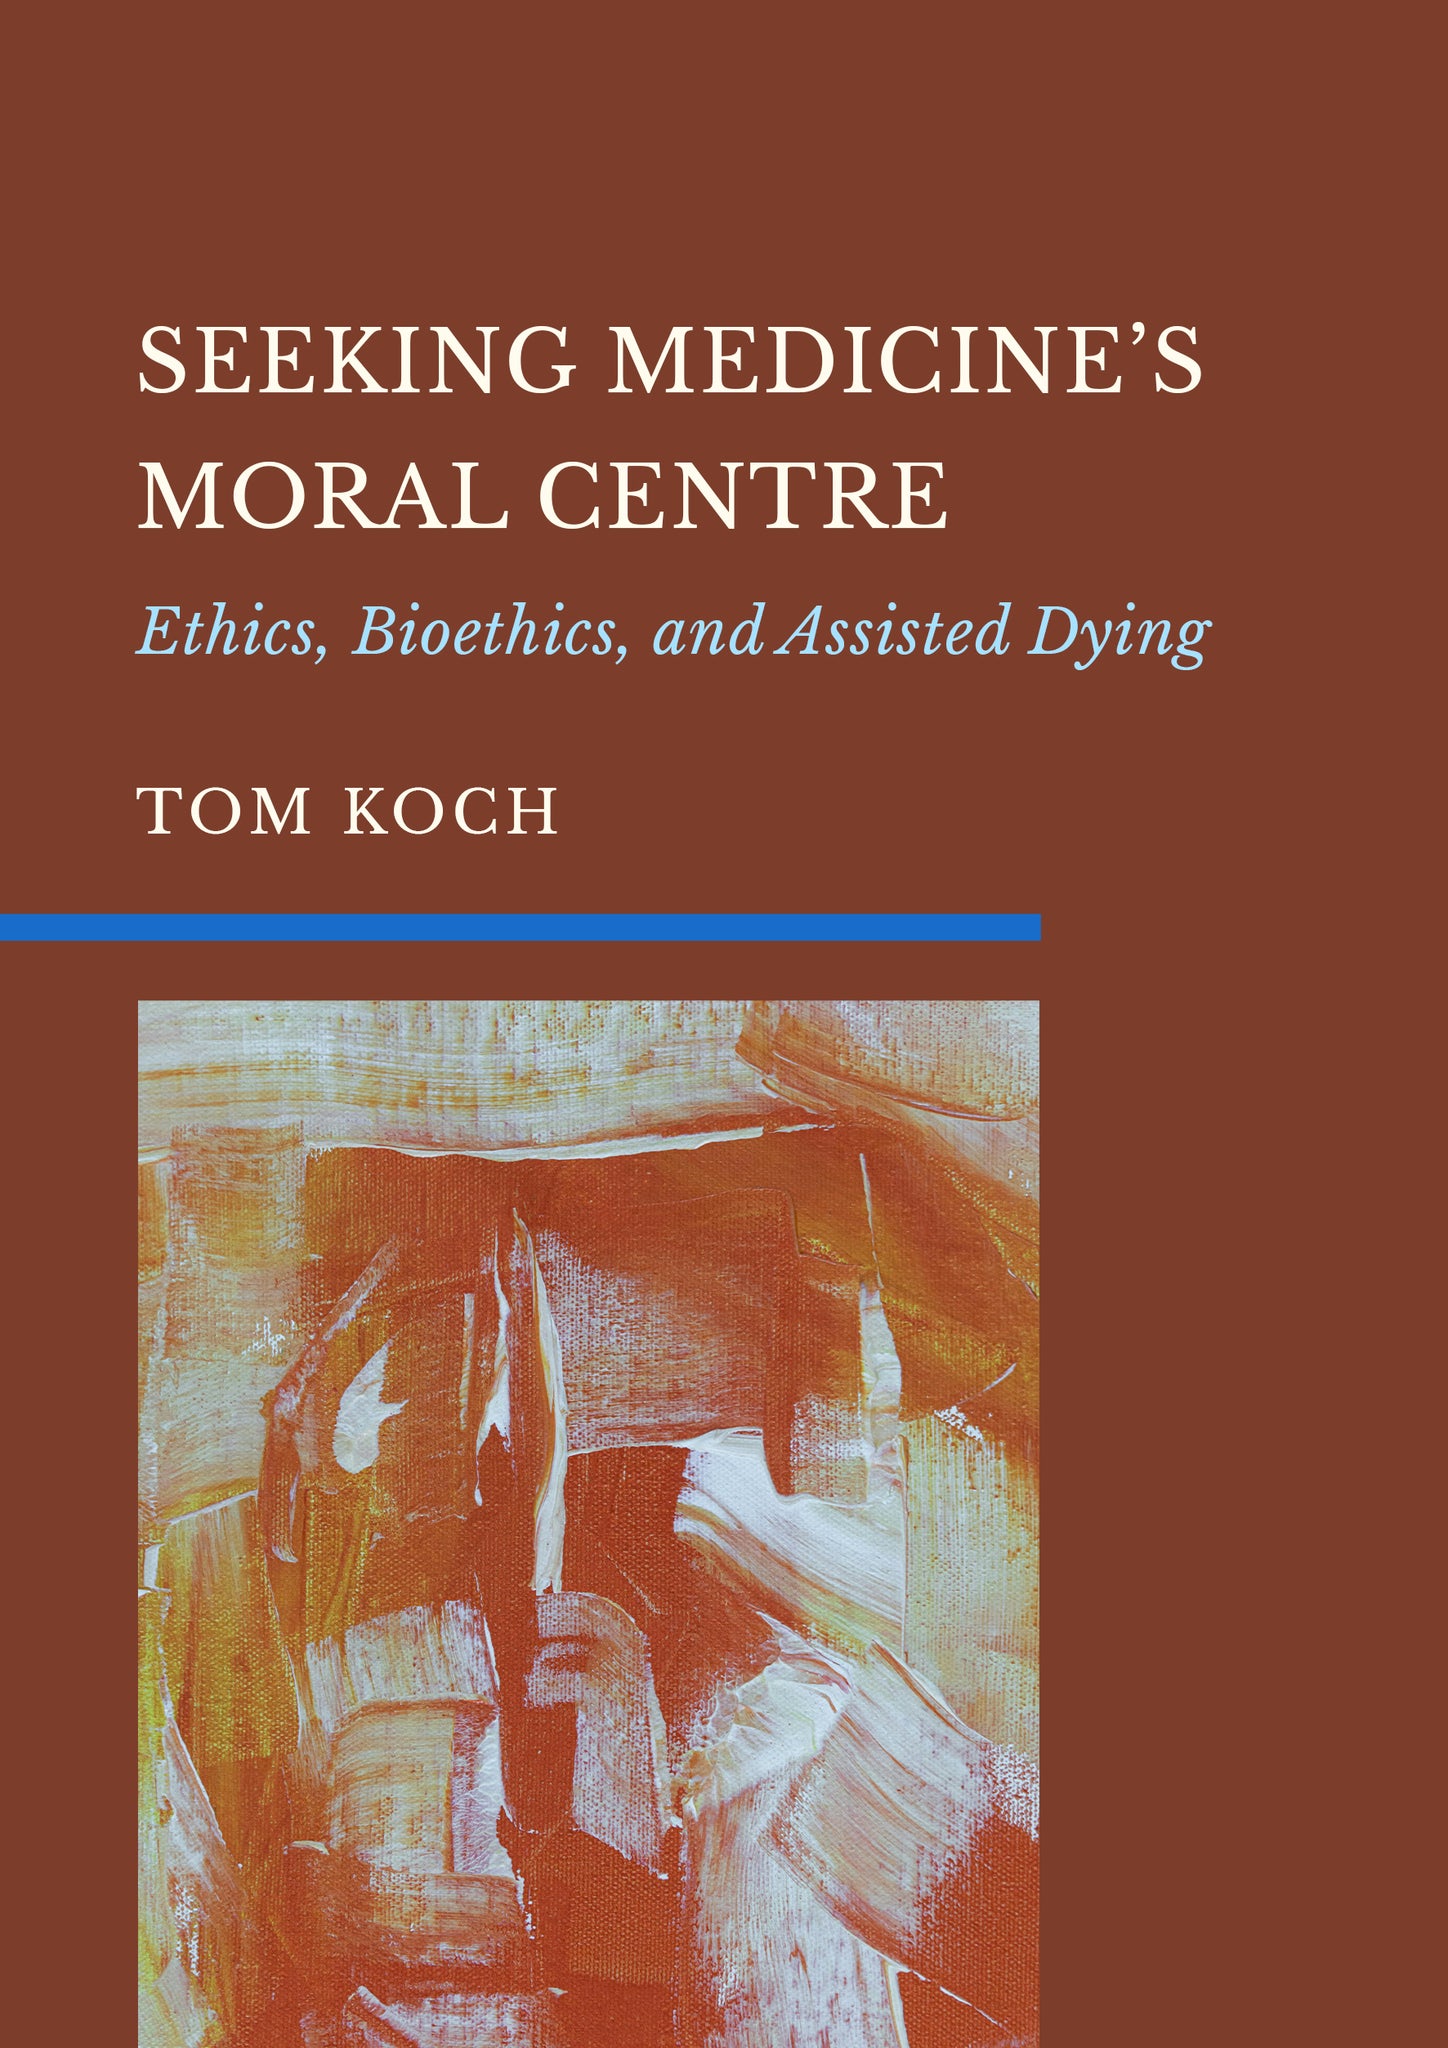 Seeking Medicine’s Moral Centre: Ethics, Bioethics, and Assisted Dying